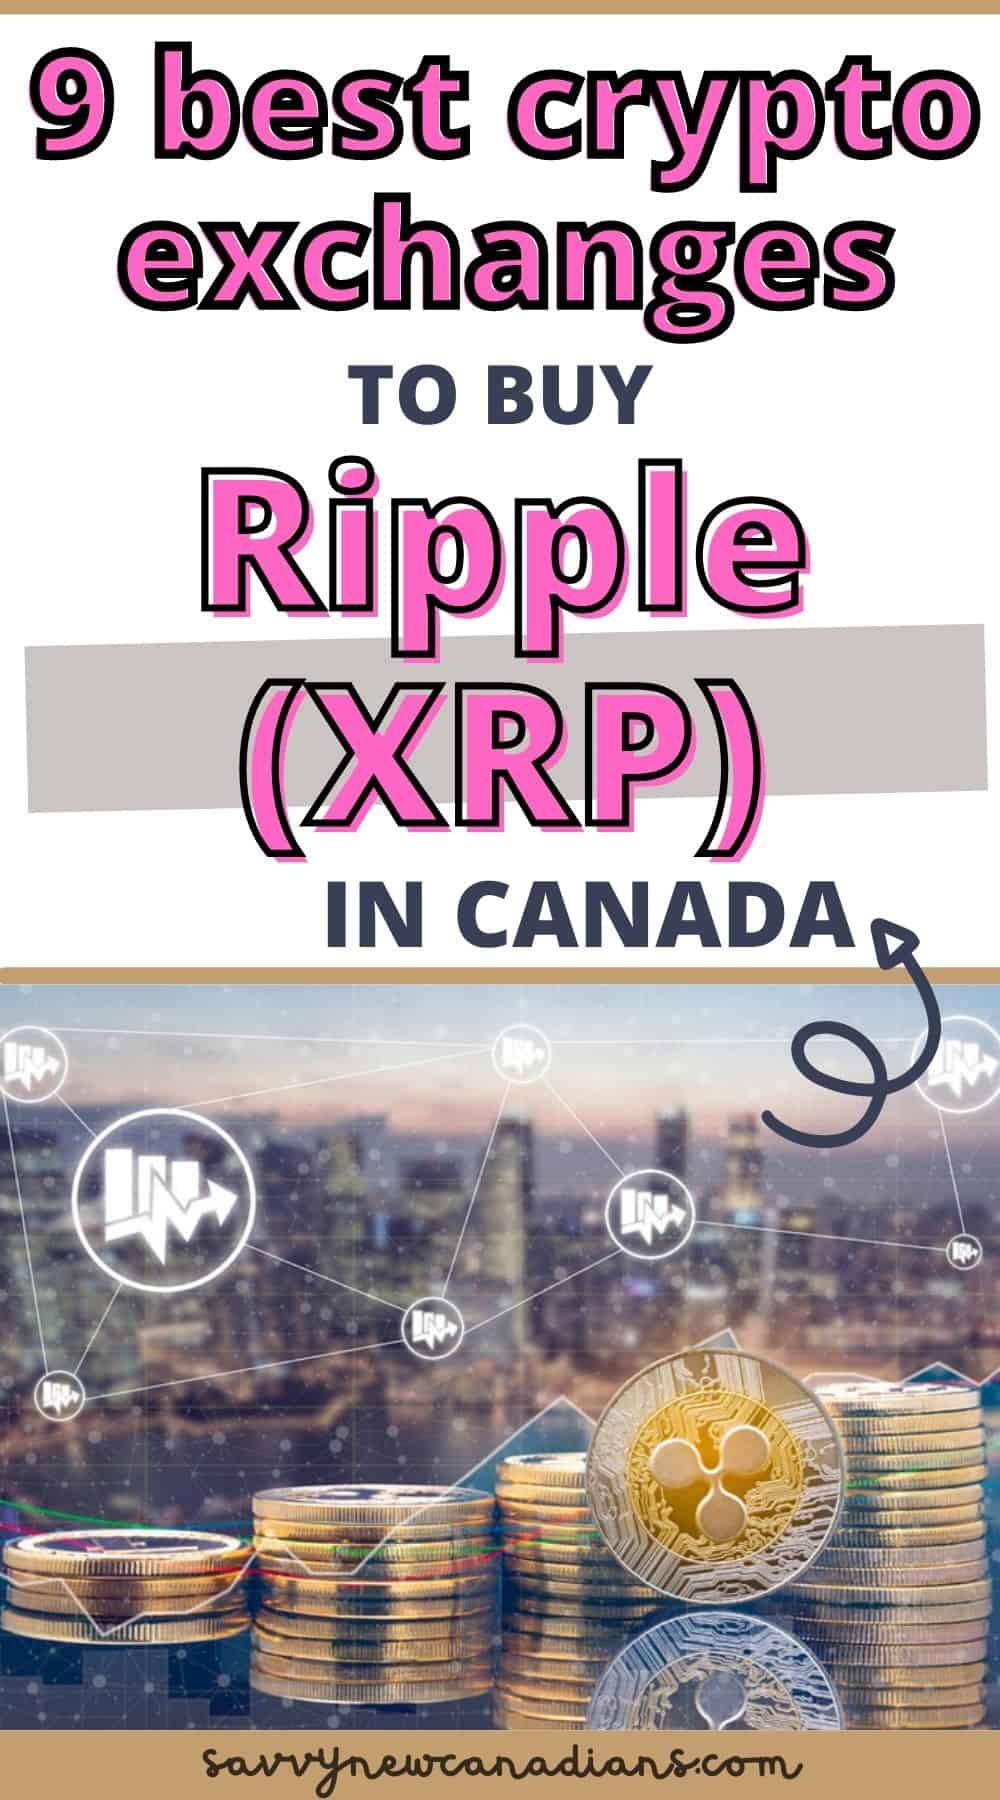 How To Buy XRP (Ripple) in Canada: 5 Best XRP Crypto Exchanges